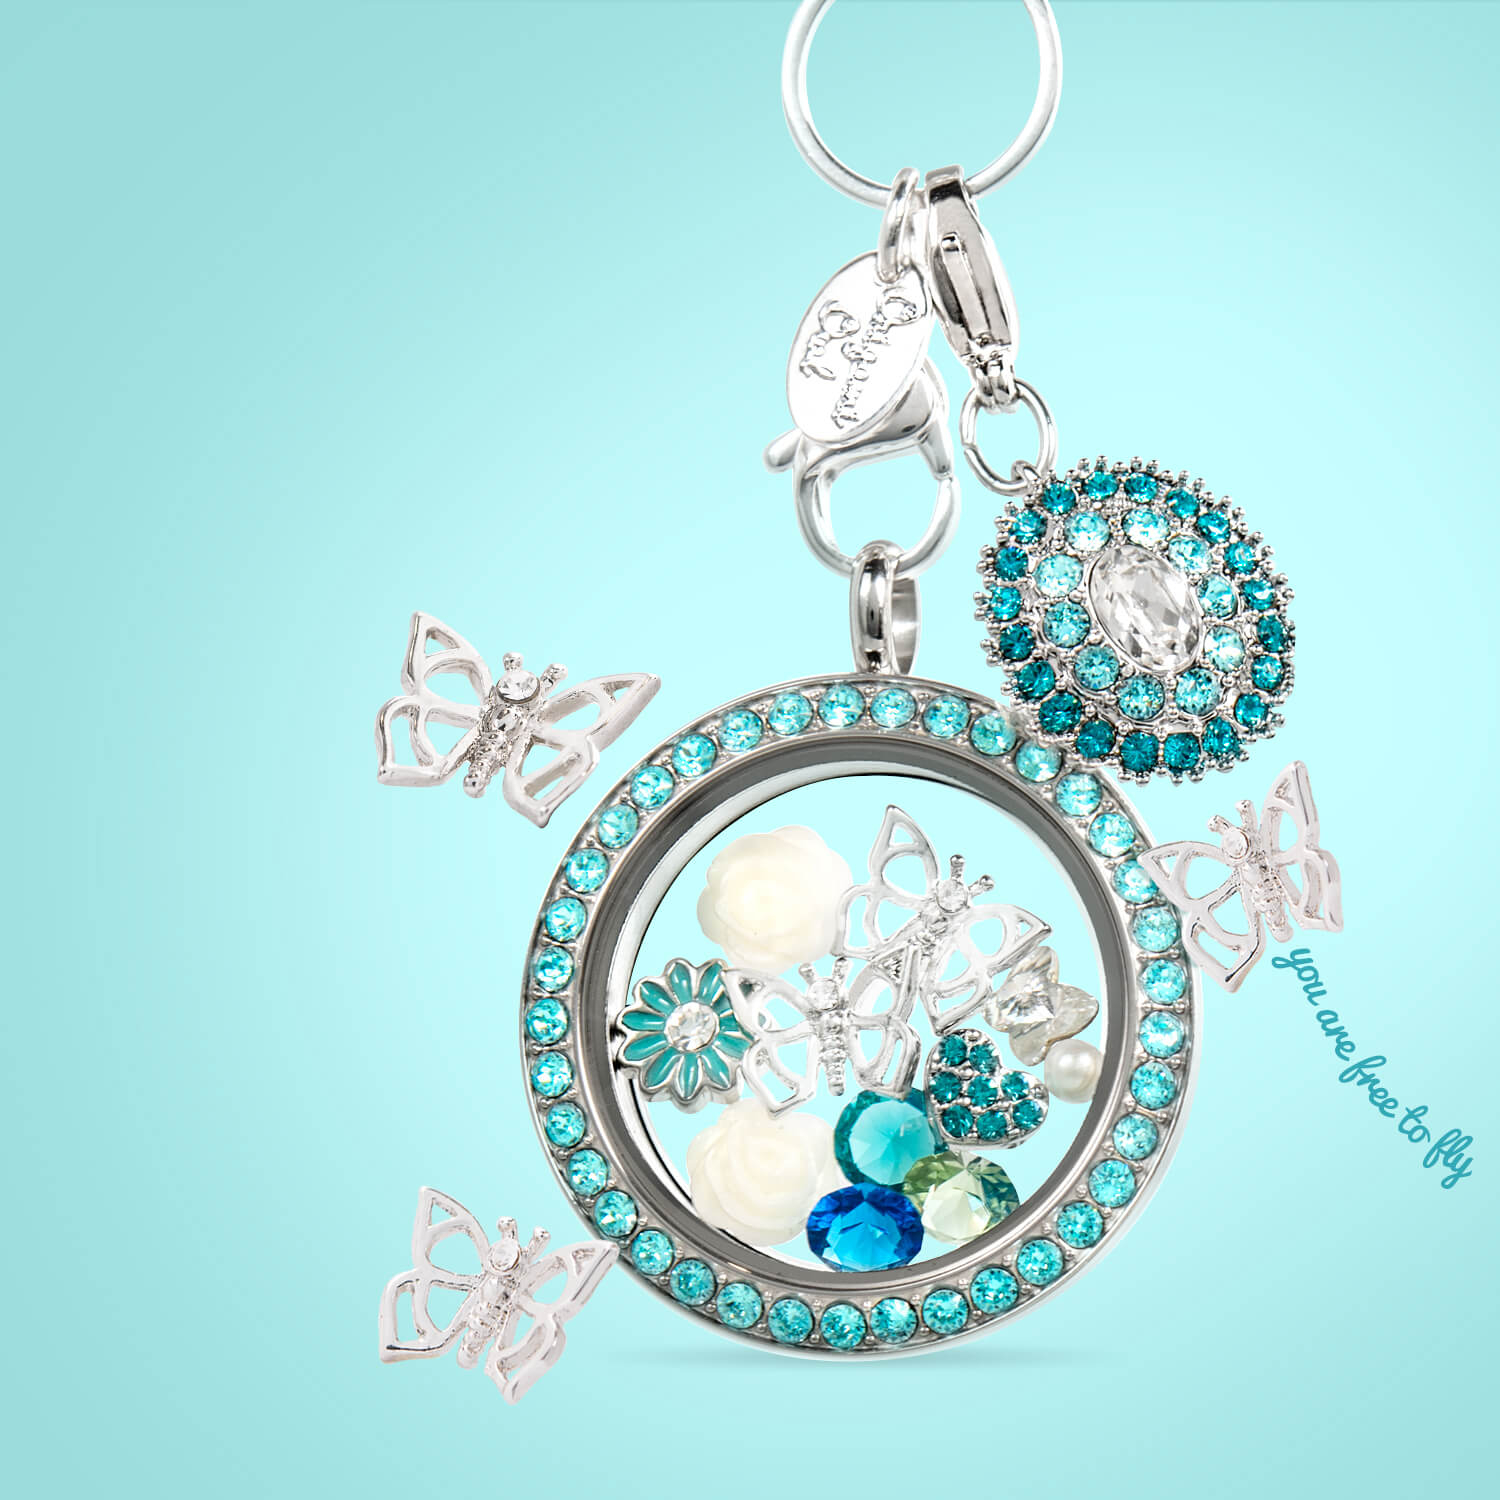 Origami Owl Over The Heart Chain Origami Owl Jewelry Videos Join My Join My Team Be A Part Of An